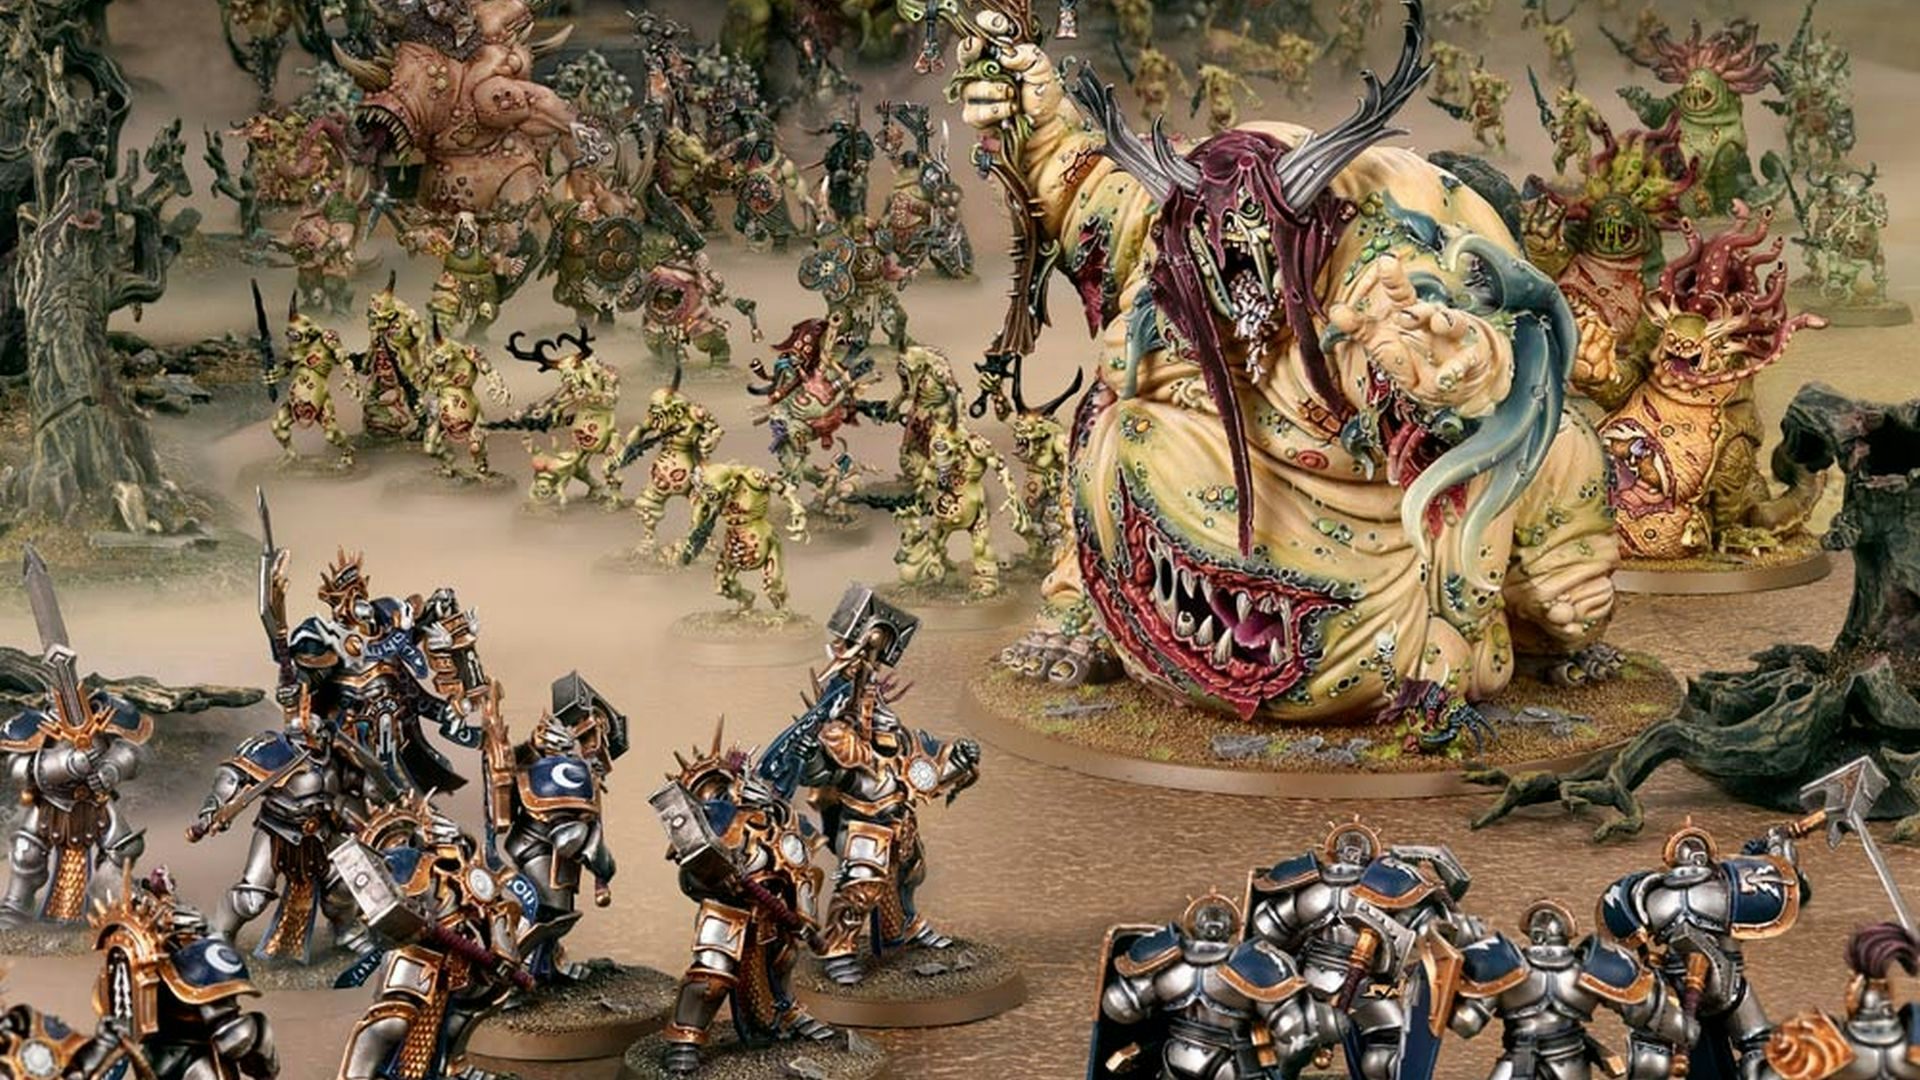 Tell us the story of the best or most memorable Warhammer game you ever played!